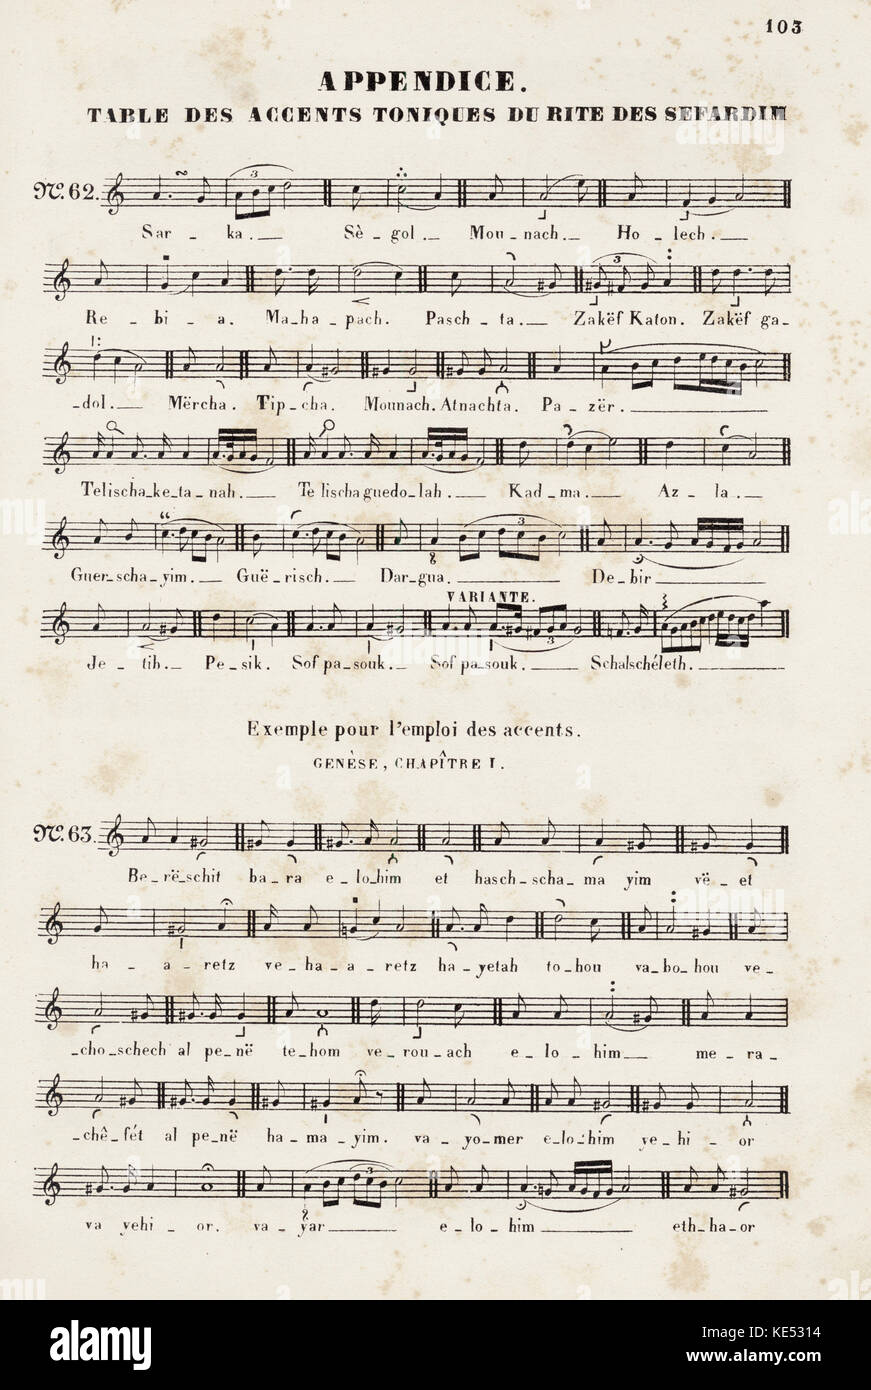 Biblical tropes converted to musical notation for the Sephardi tradition. from Jewish popular religious songs title page/ Recueil des Chants Religieux et Populaires des Israelitesdes Temps les plus reculés jusqu'a nos jours.  Partitions transcrites pour piano our Orgue Harmonica. By S. Naumbourg, Paris, late 19th century. Stock Photo